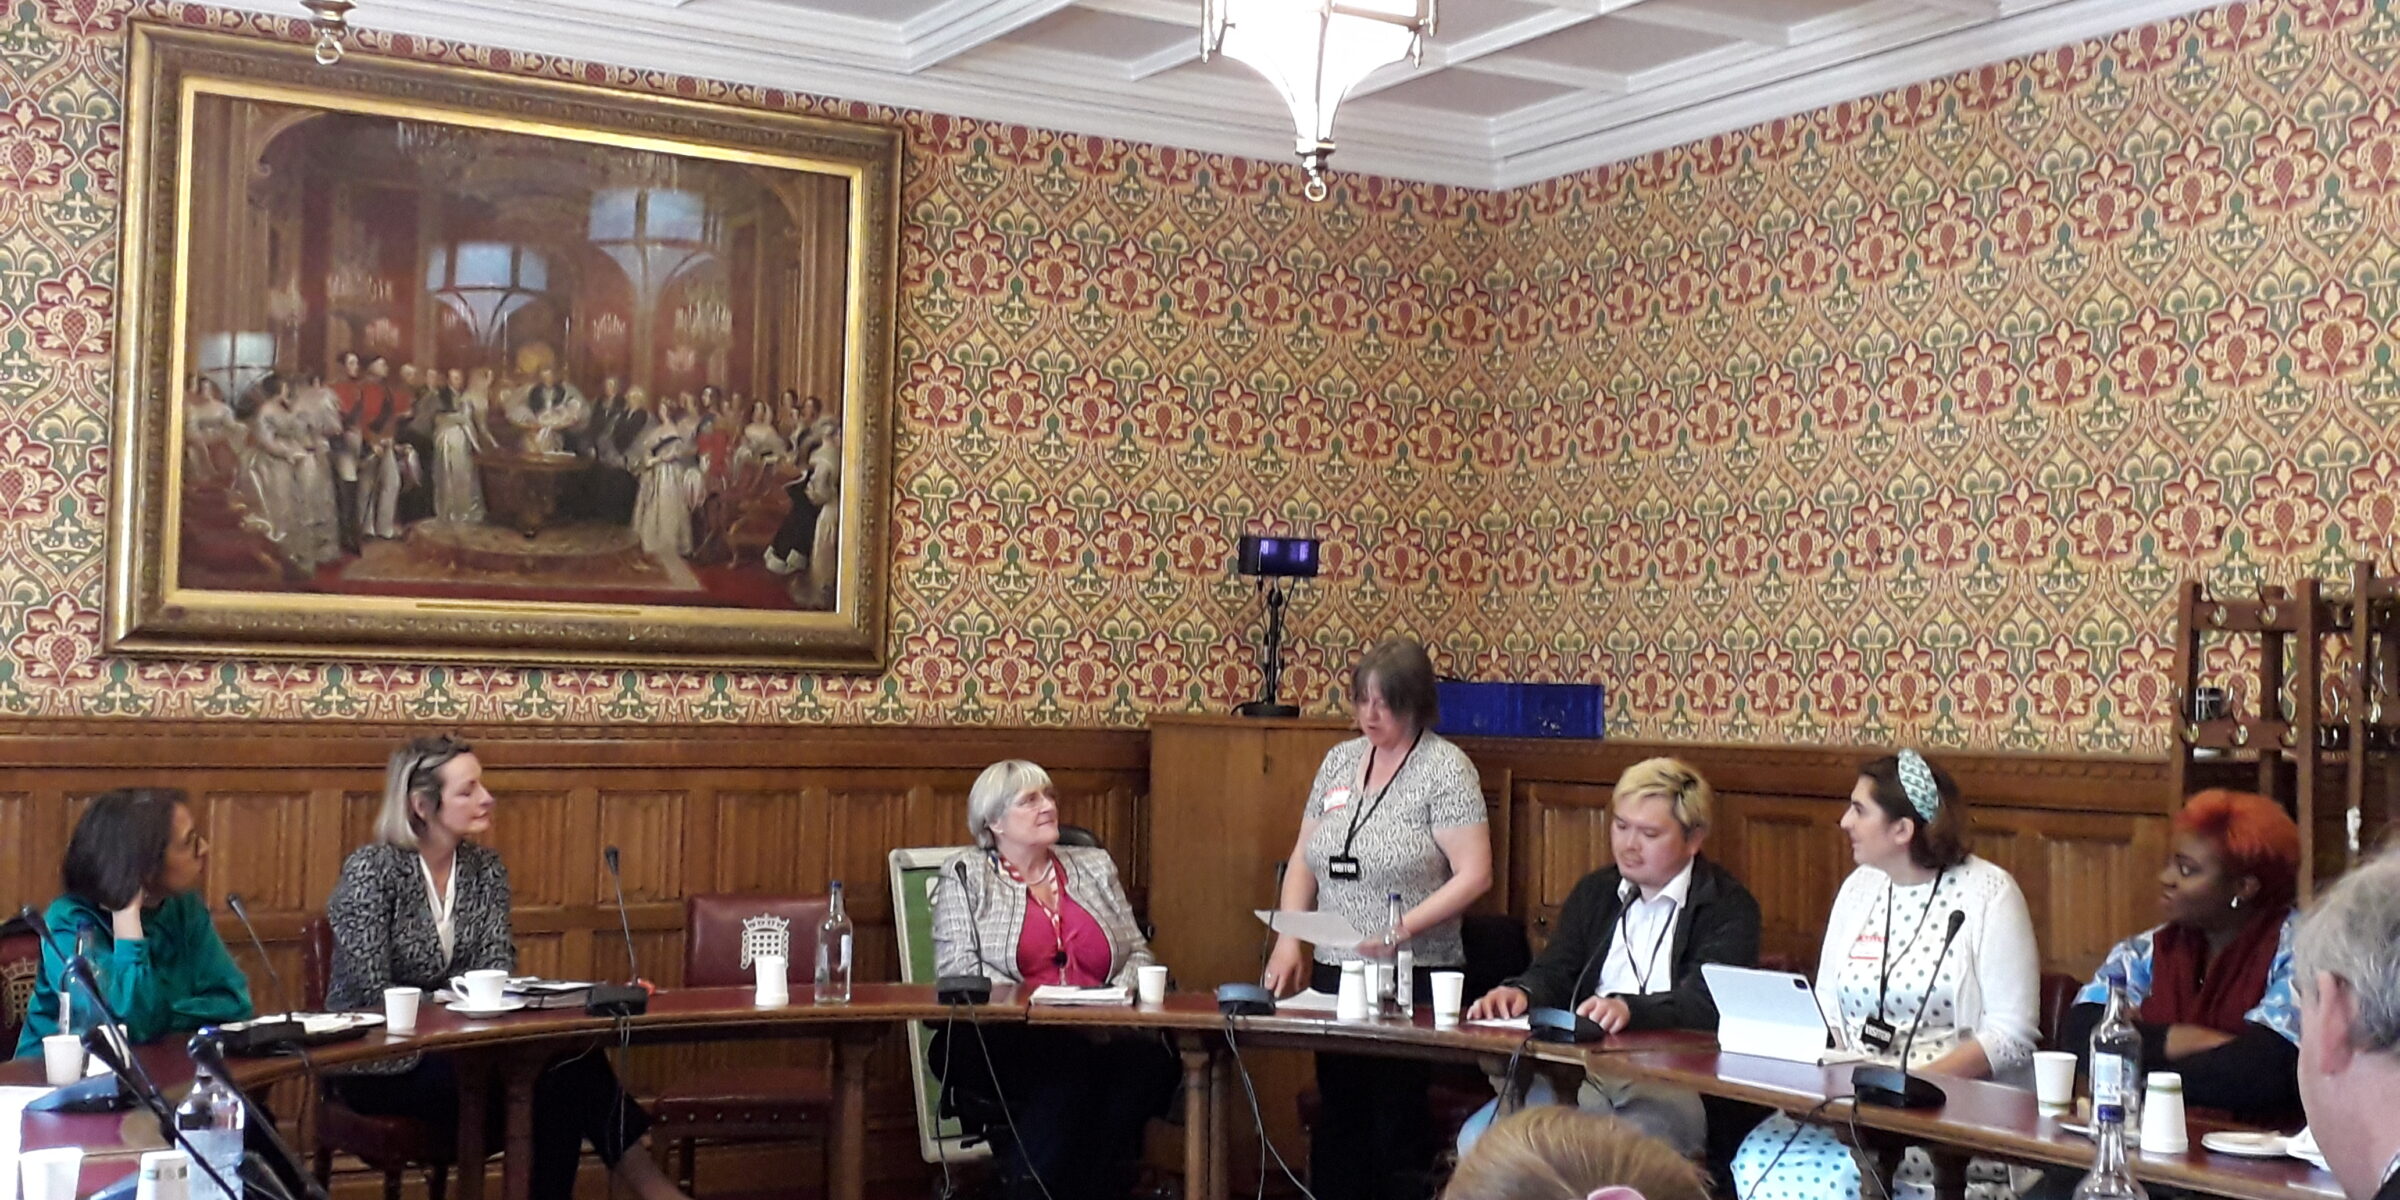 Patsy is standing in the House of Lords talking about her life in a room full of people.